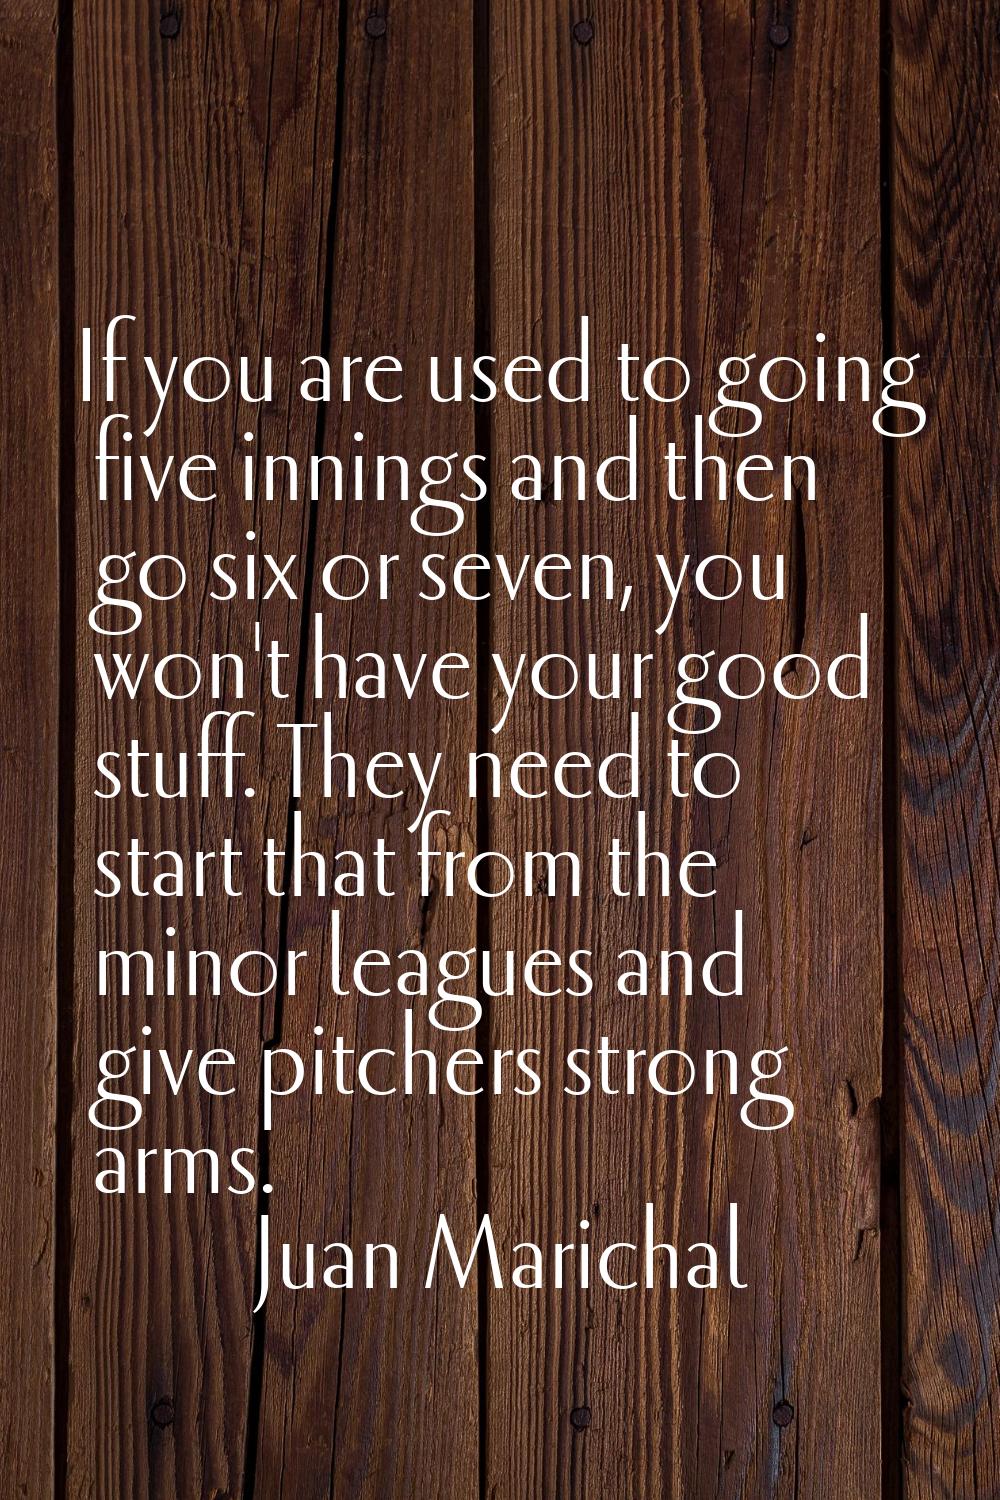 If you are used to going five innings and then go six or seven, you won't have your good stuff. The